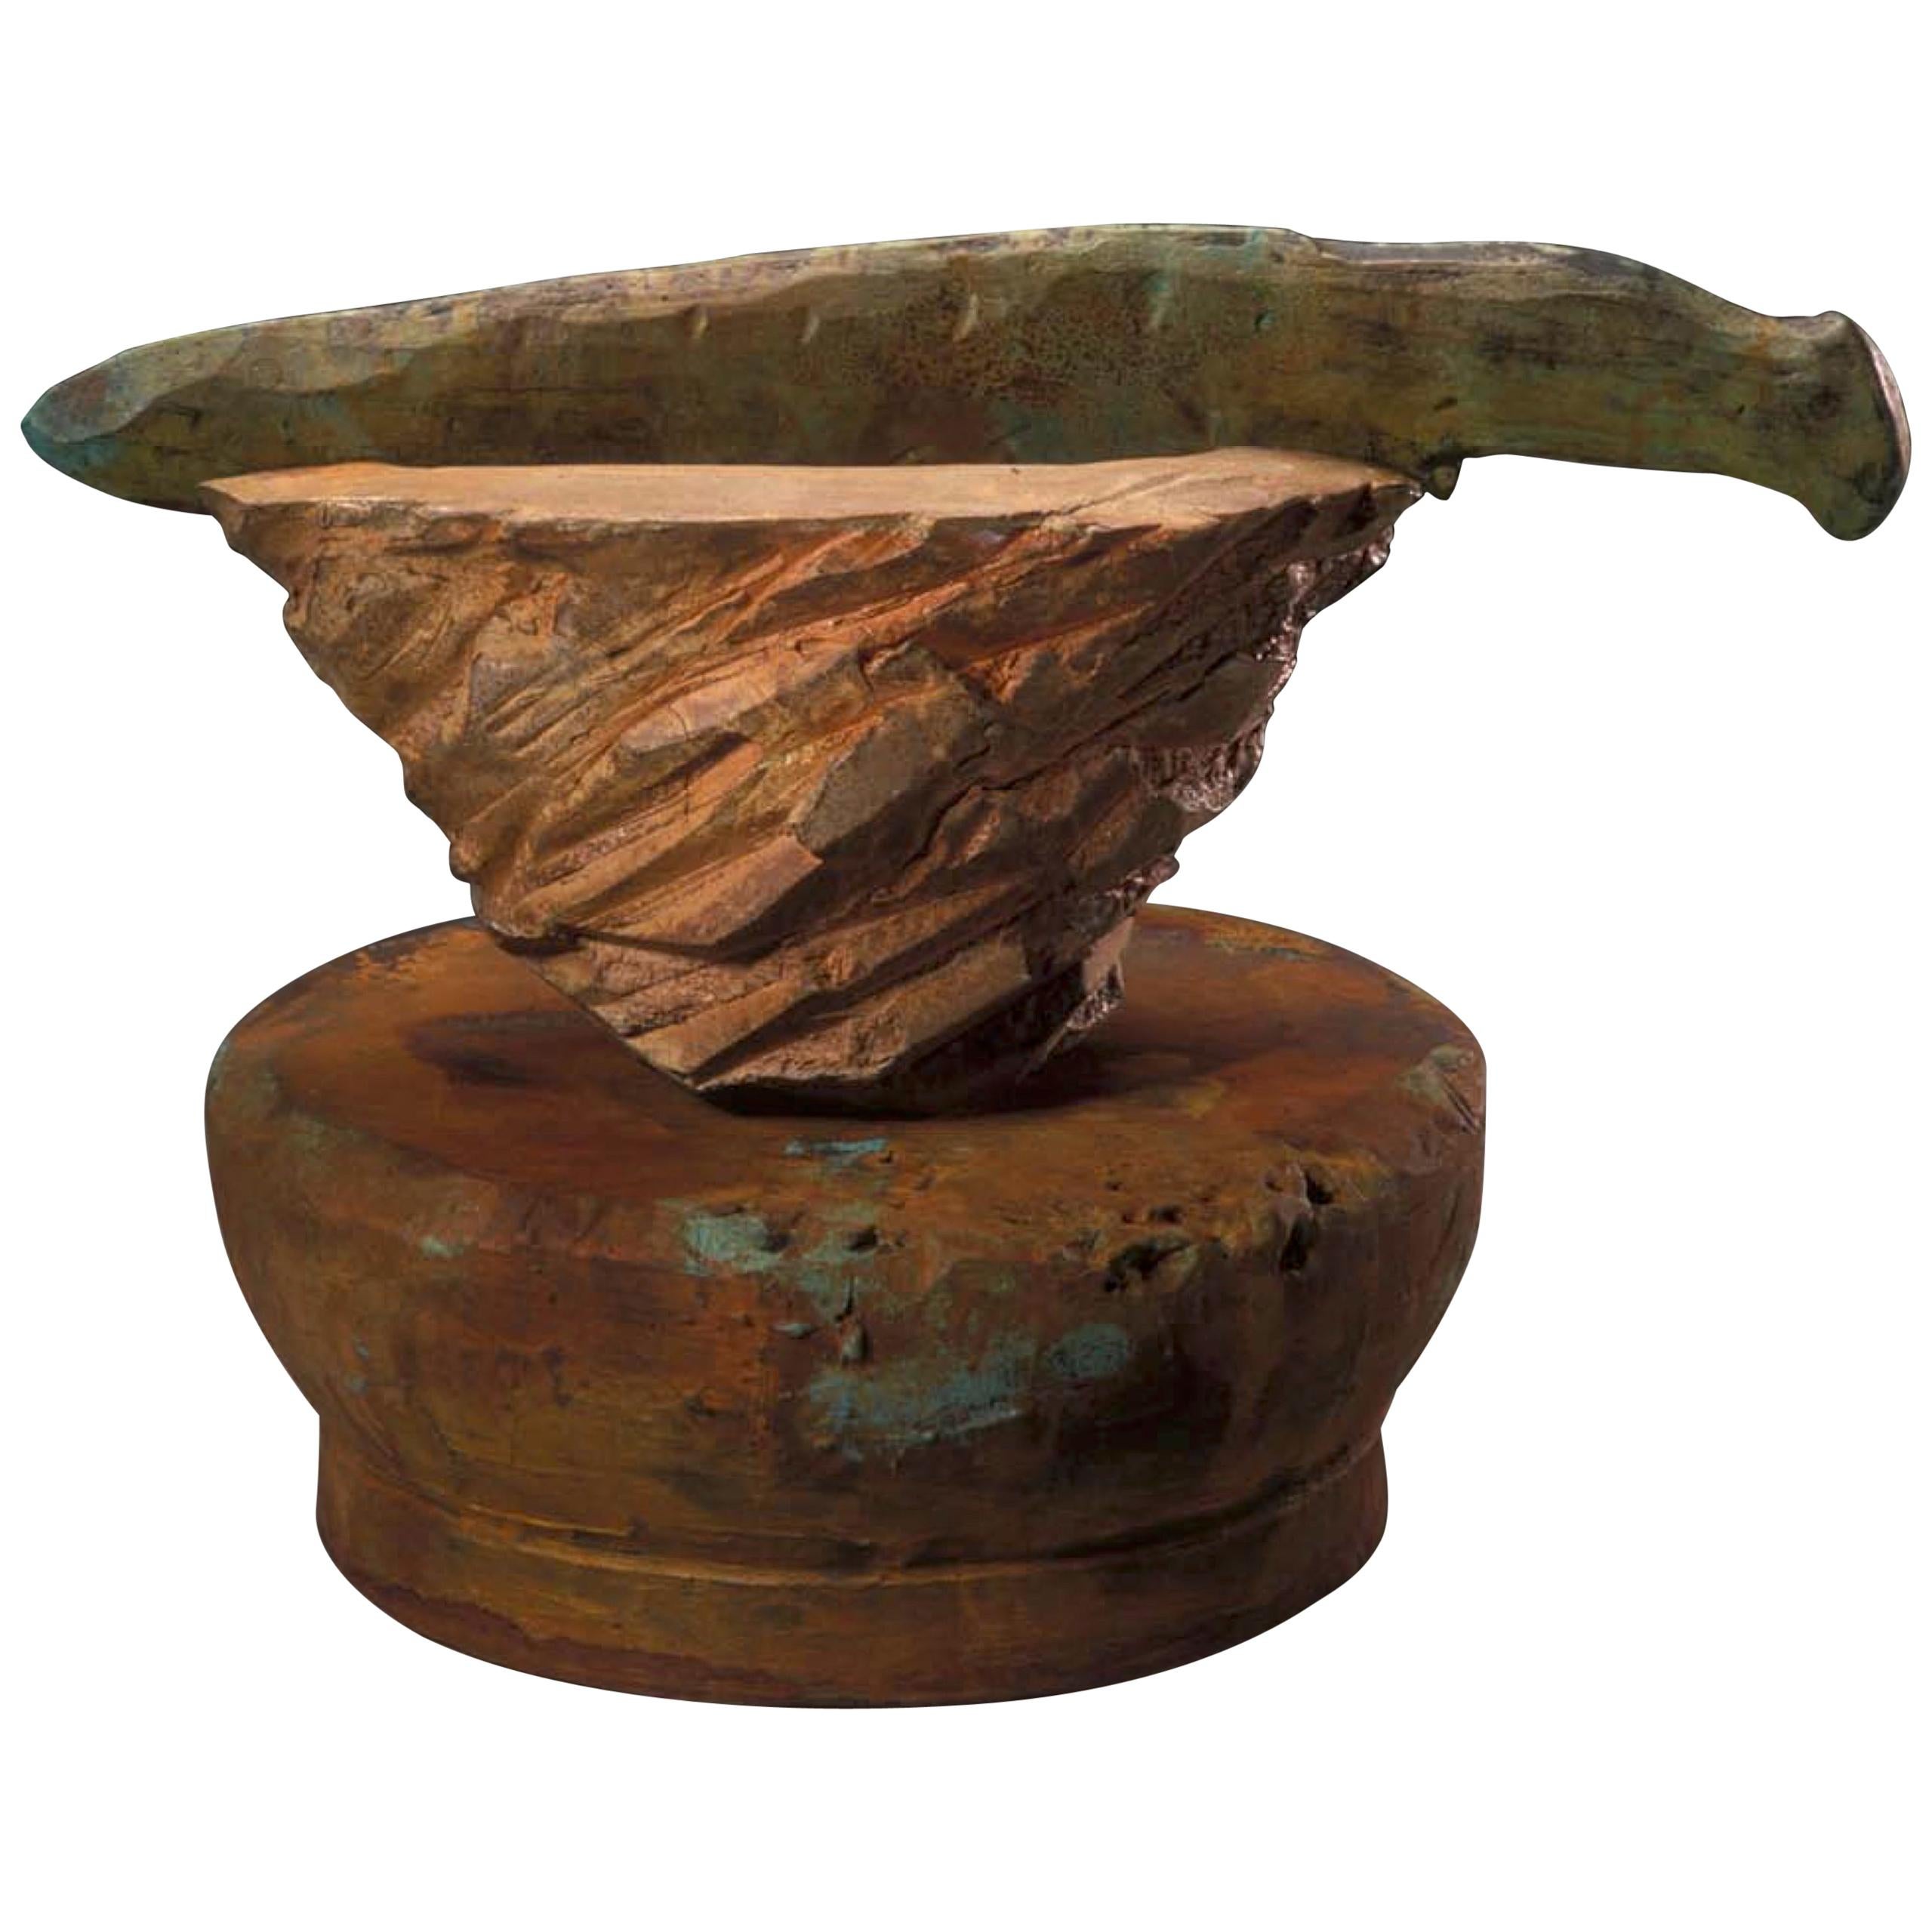 Richard Hirsch and Peter Voulkos Ceramic Altar Bowl with Weapon, 2001 For Sale